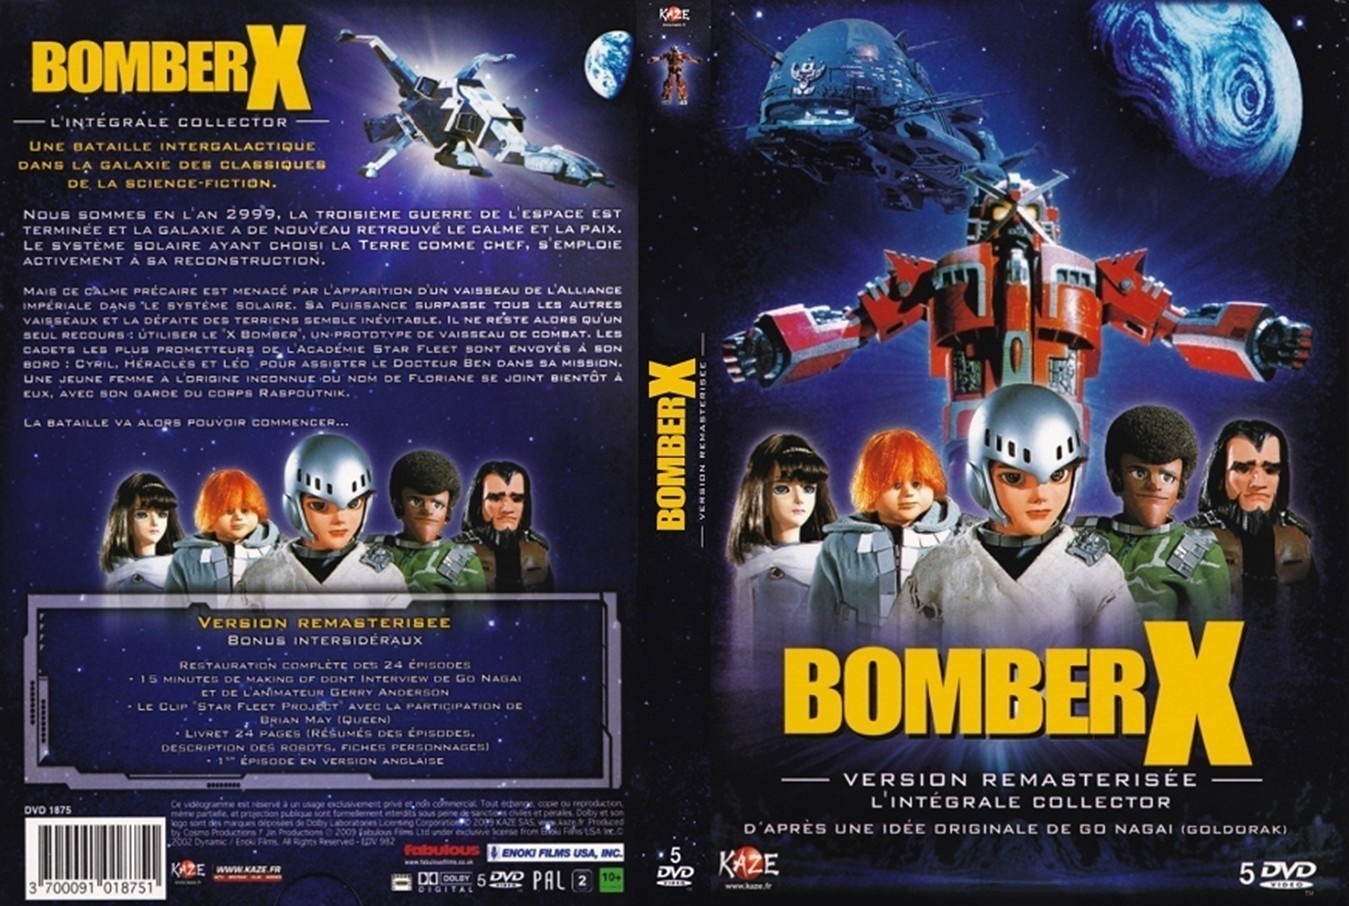 Jaquette DVD Bomber X